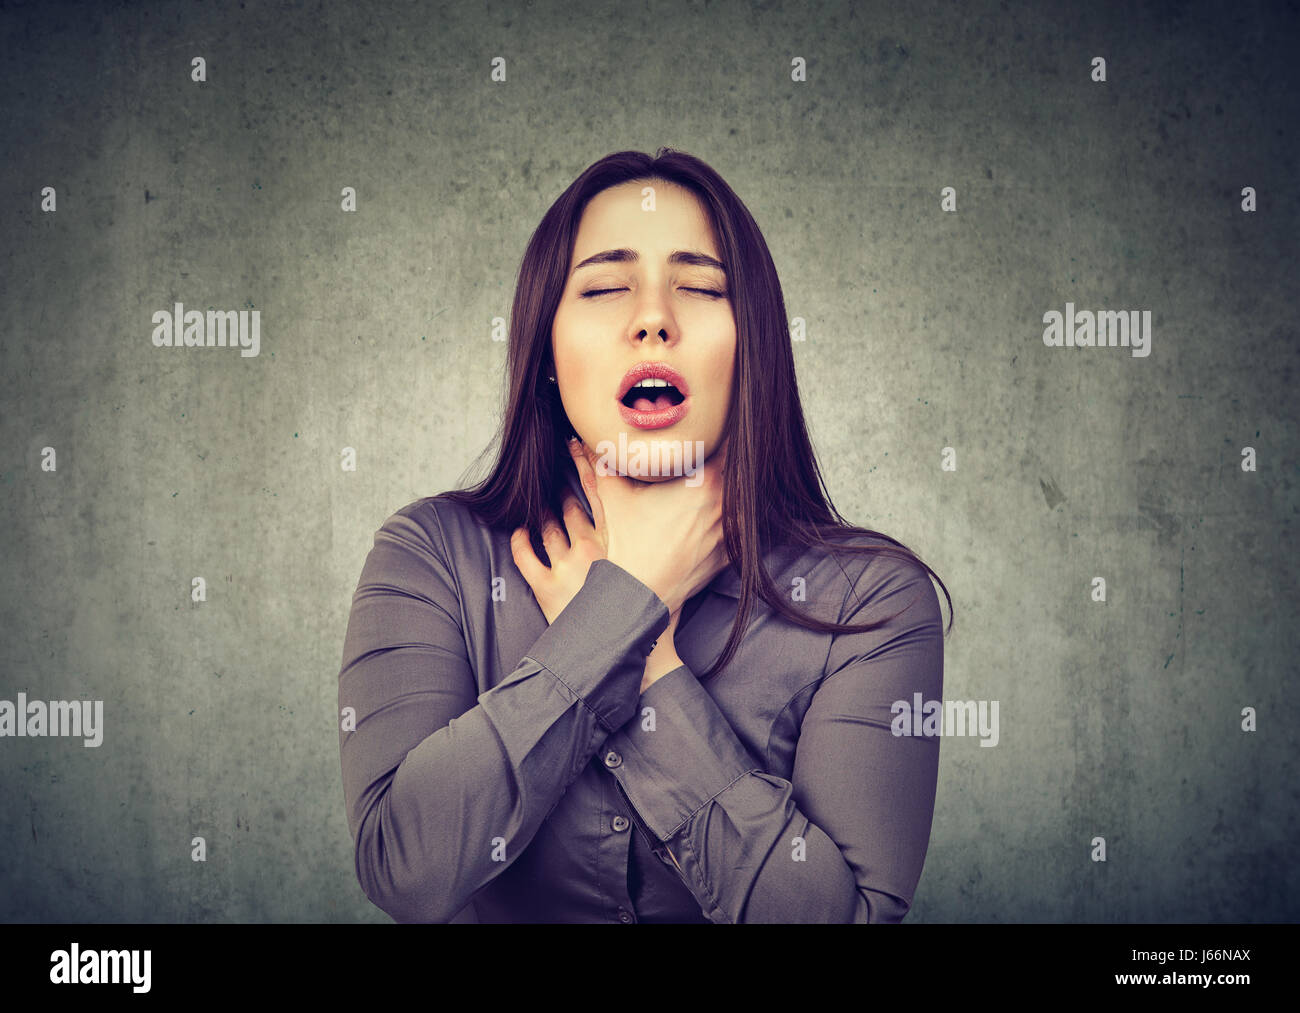 Young woman having asthma attack or choking can't breath suffering from respiration problems isolated on gray background Stock Photo